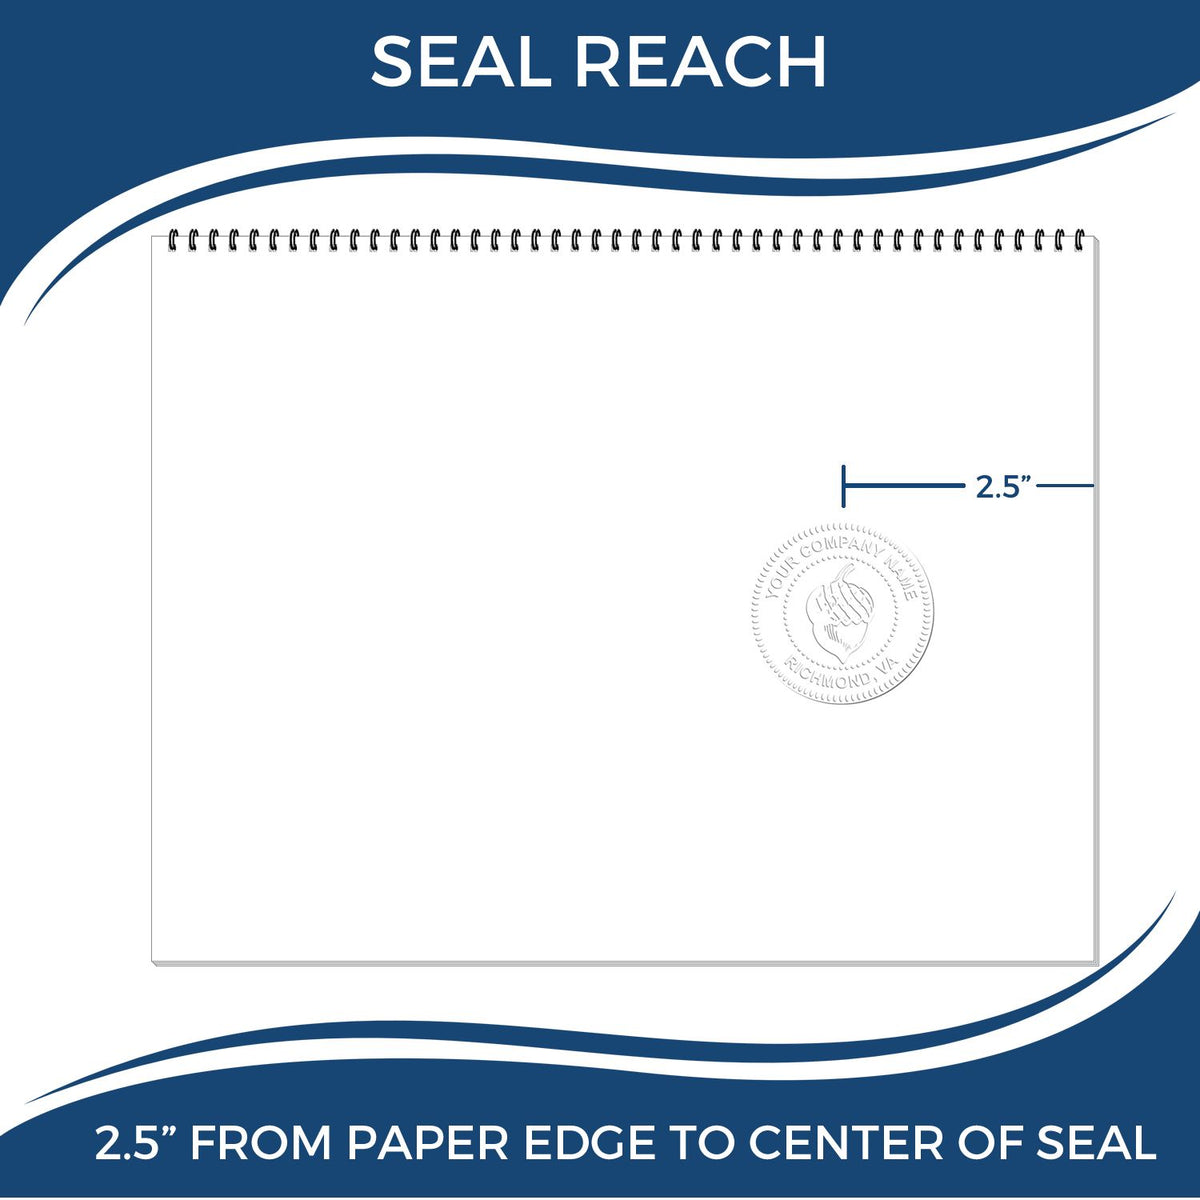 An infographic showing the seal reach which is represented by a ruler and a miniature seal image of the Long Reach Oklahoma PE Seal